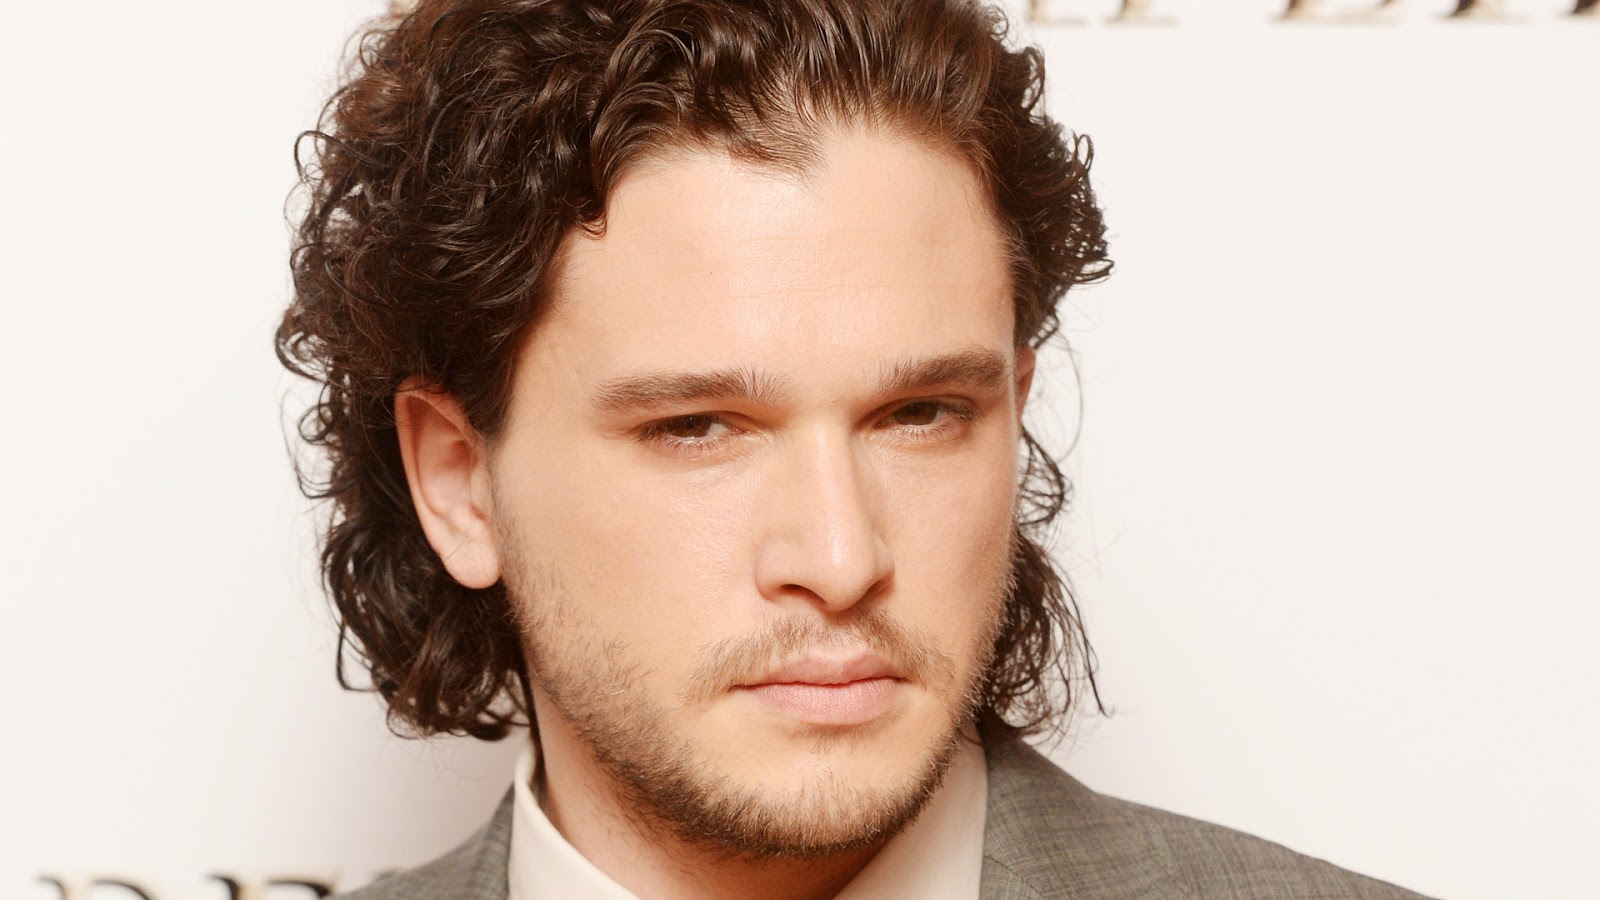 Kit Harington The Game of Thrones Actor HD Wallpaper.